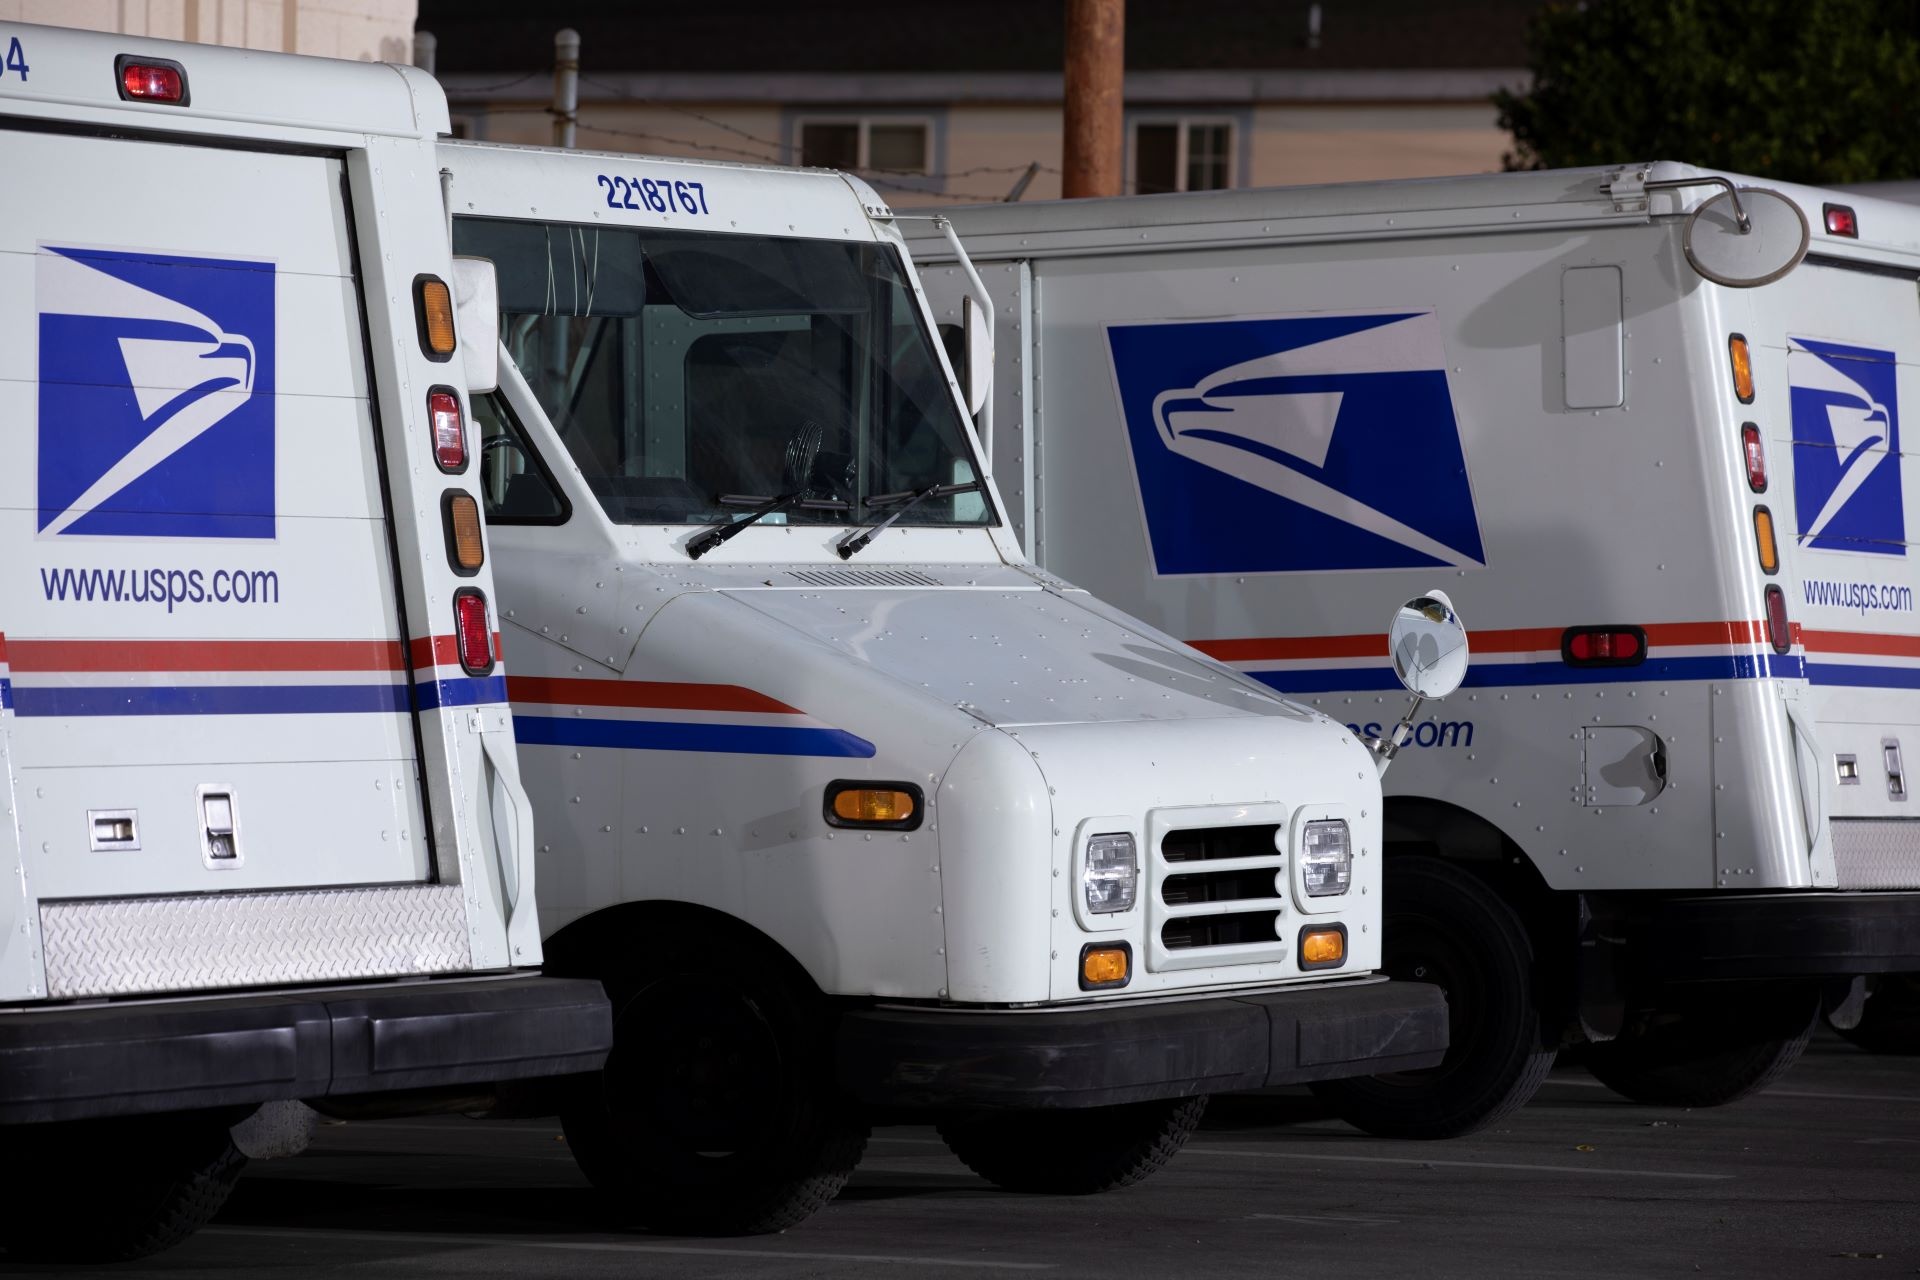 The Usps Is Going Big On Electric Vehicles — Heres Why 7832